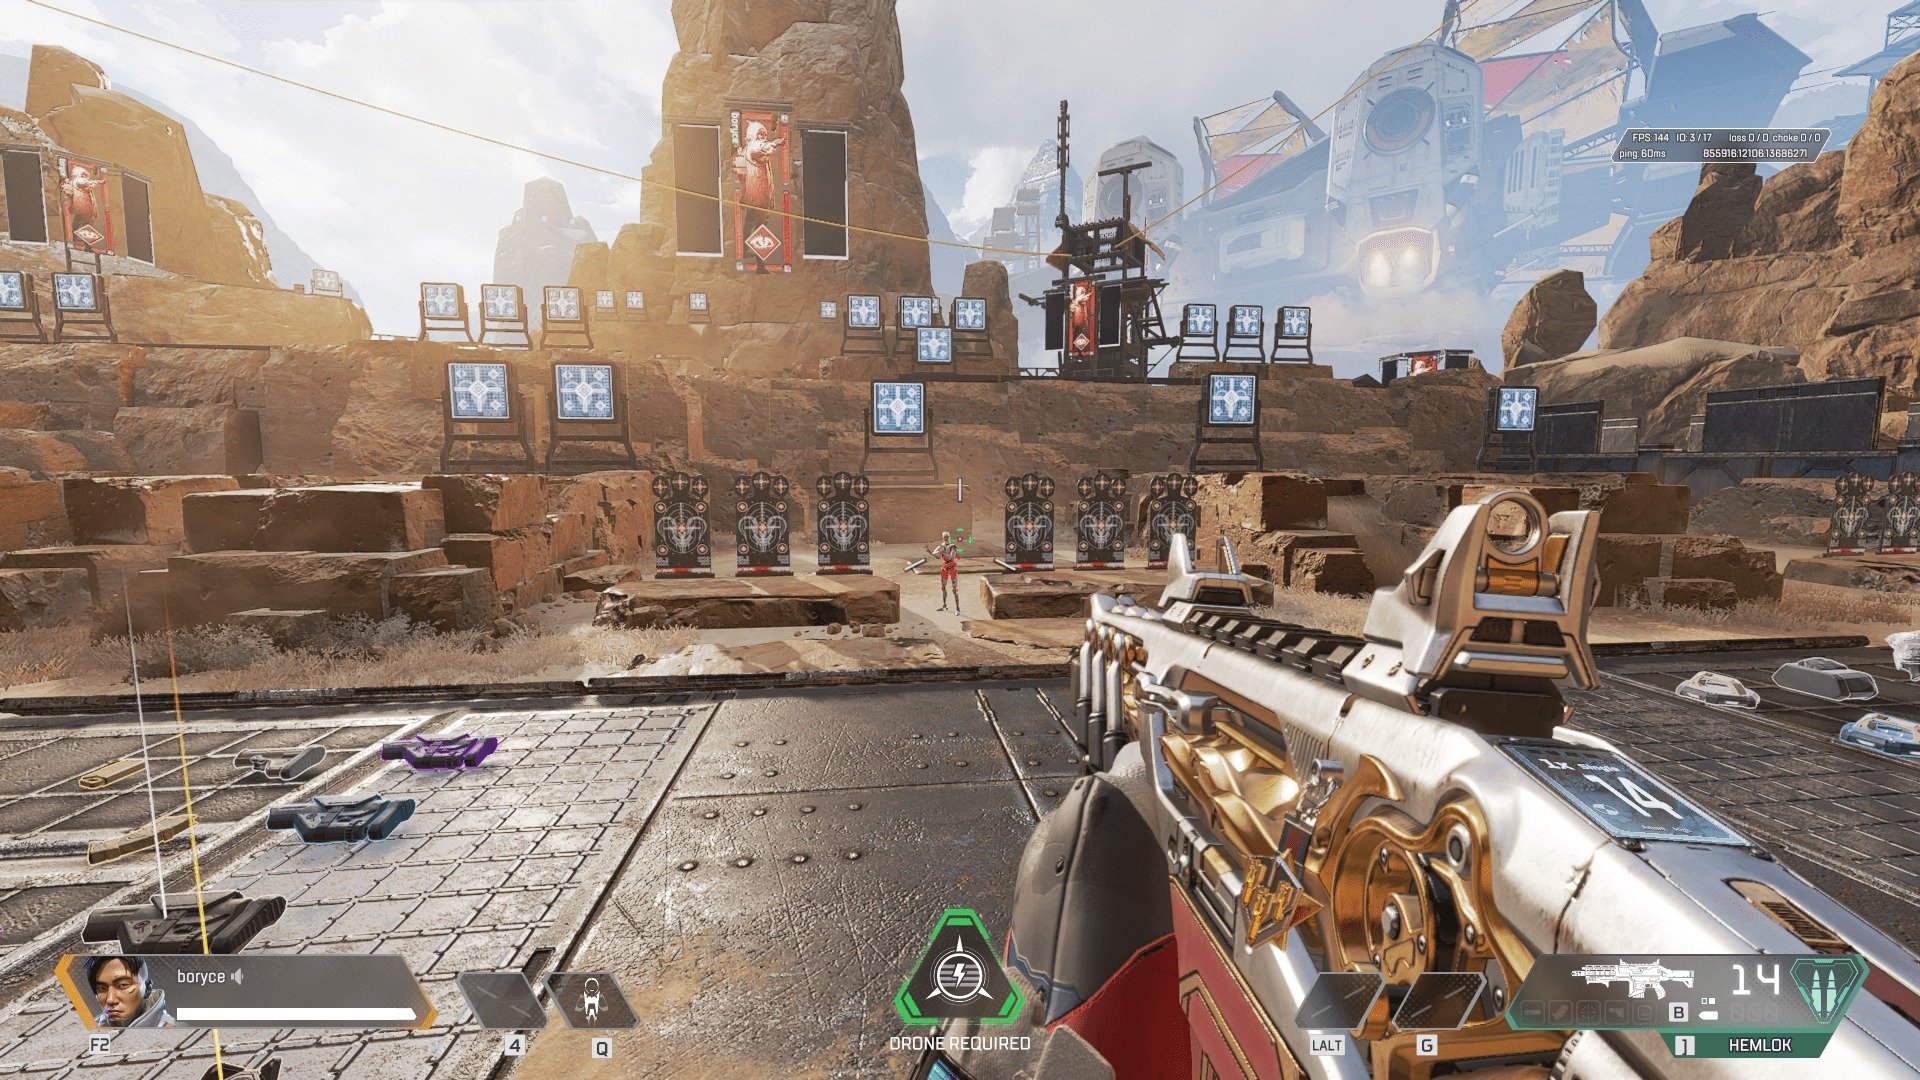 Apex Legends: How to Get XP with Welcome Challenges